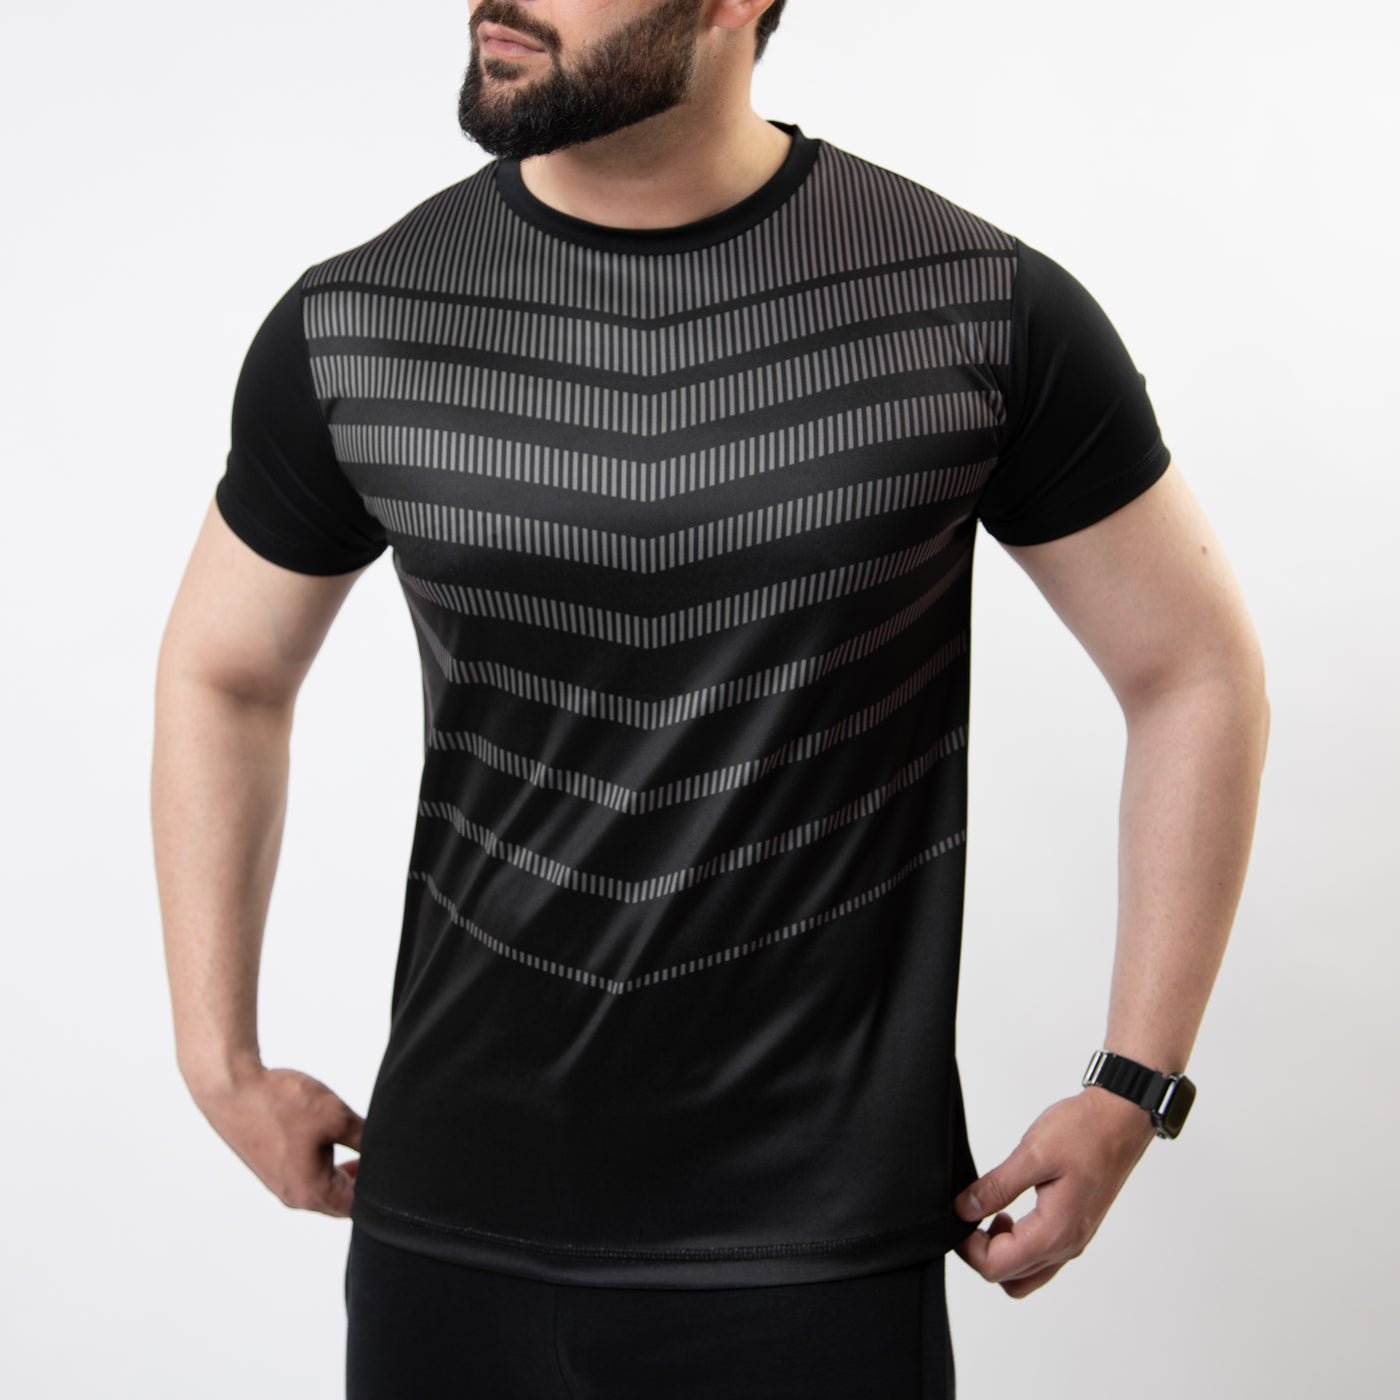 Black Sublimated Quick Dry T-Shirt with Gray Armor Stripes